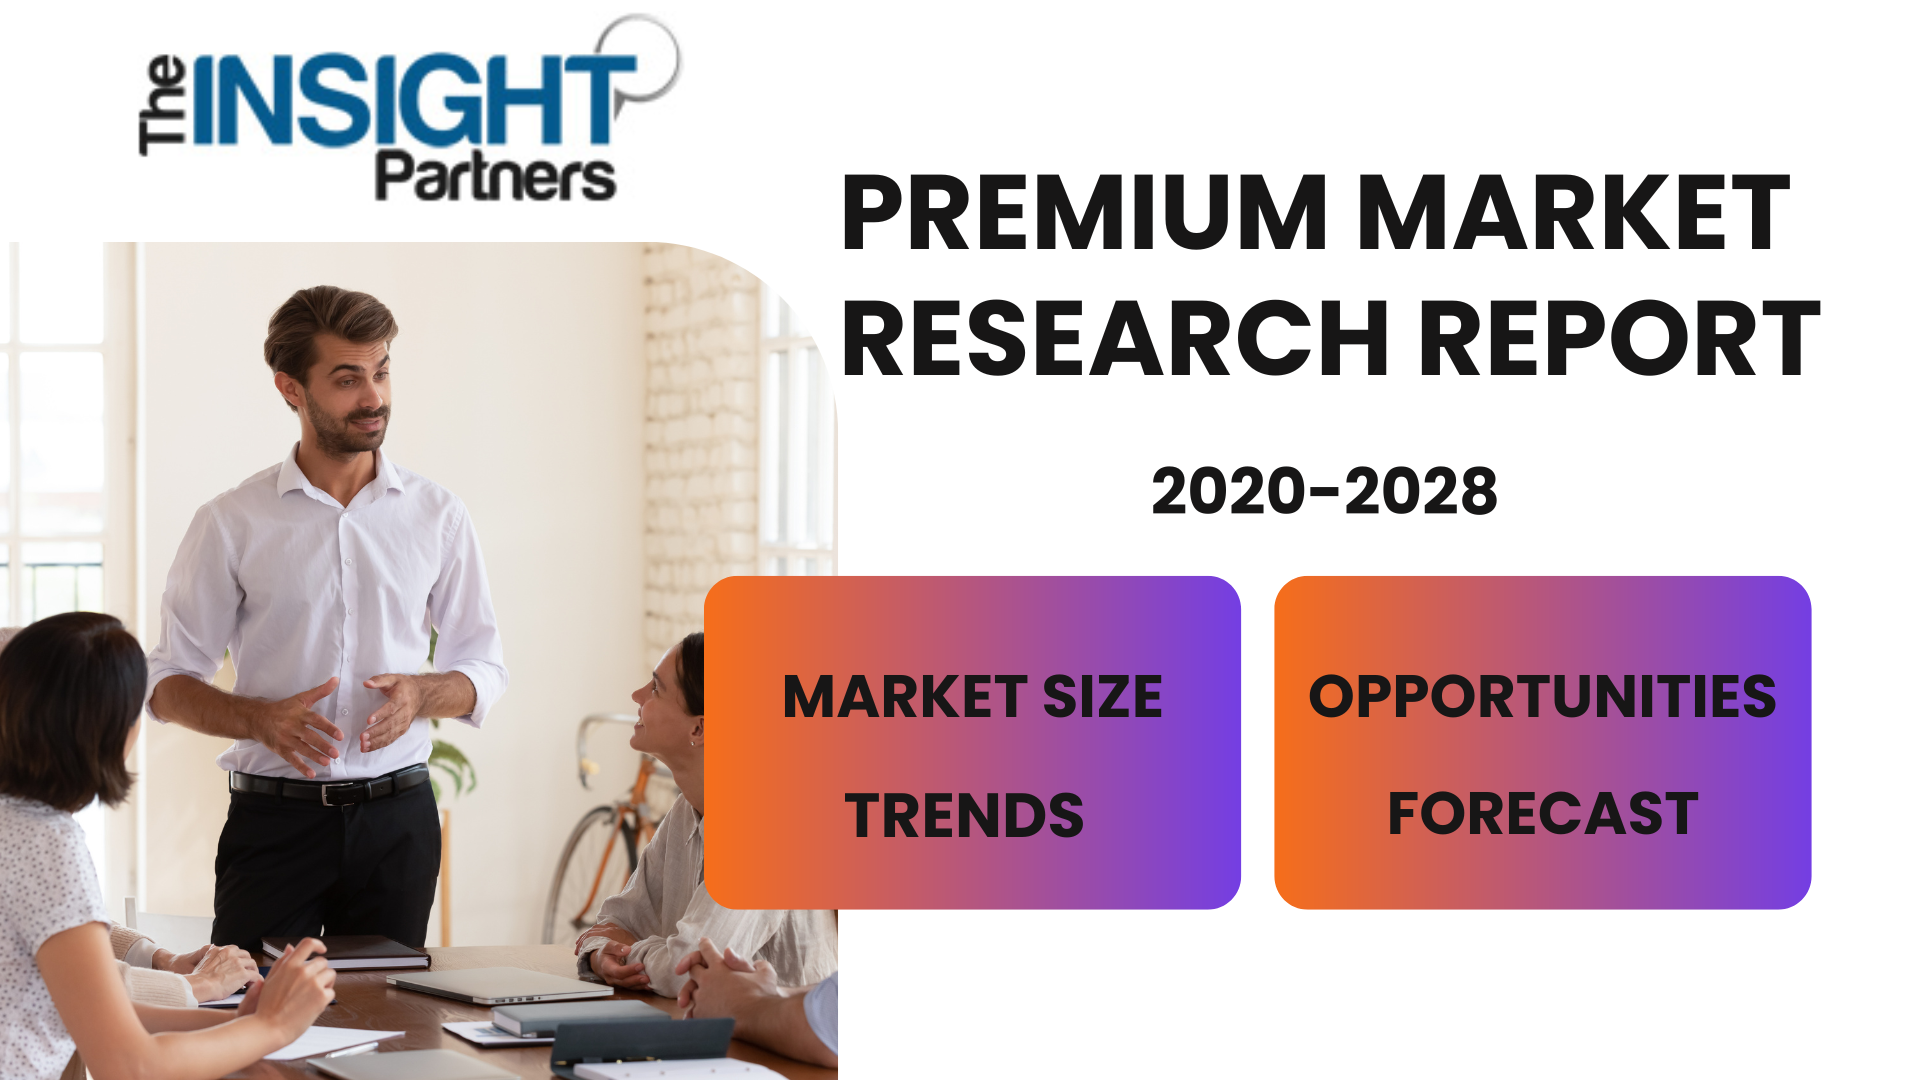 Plasma Fractionation Market Forecast Estimated to Expand at a Robust CAGR by 2028